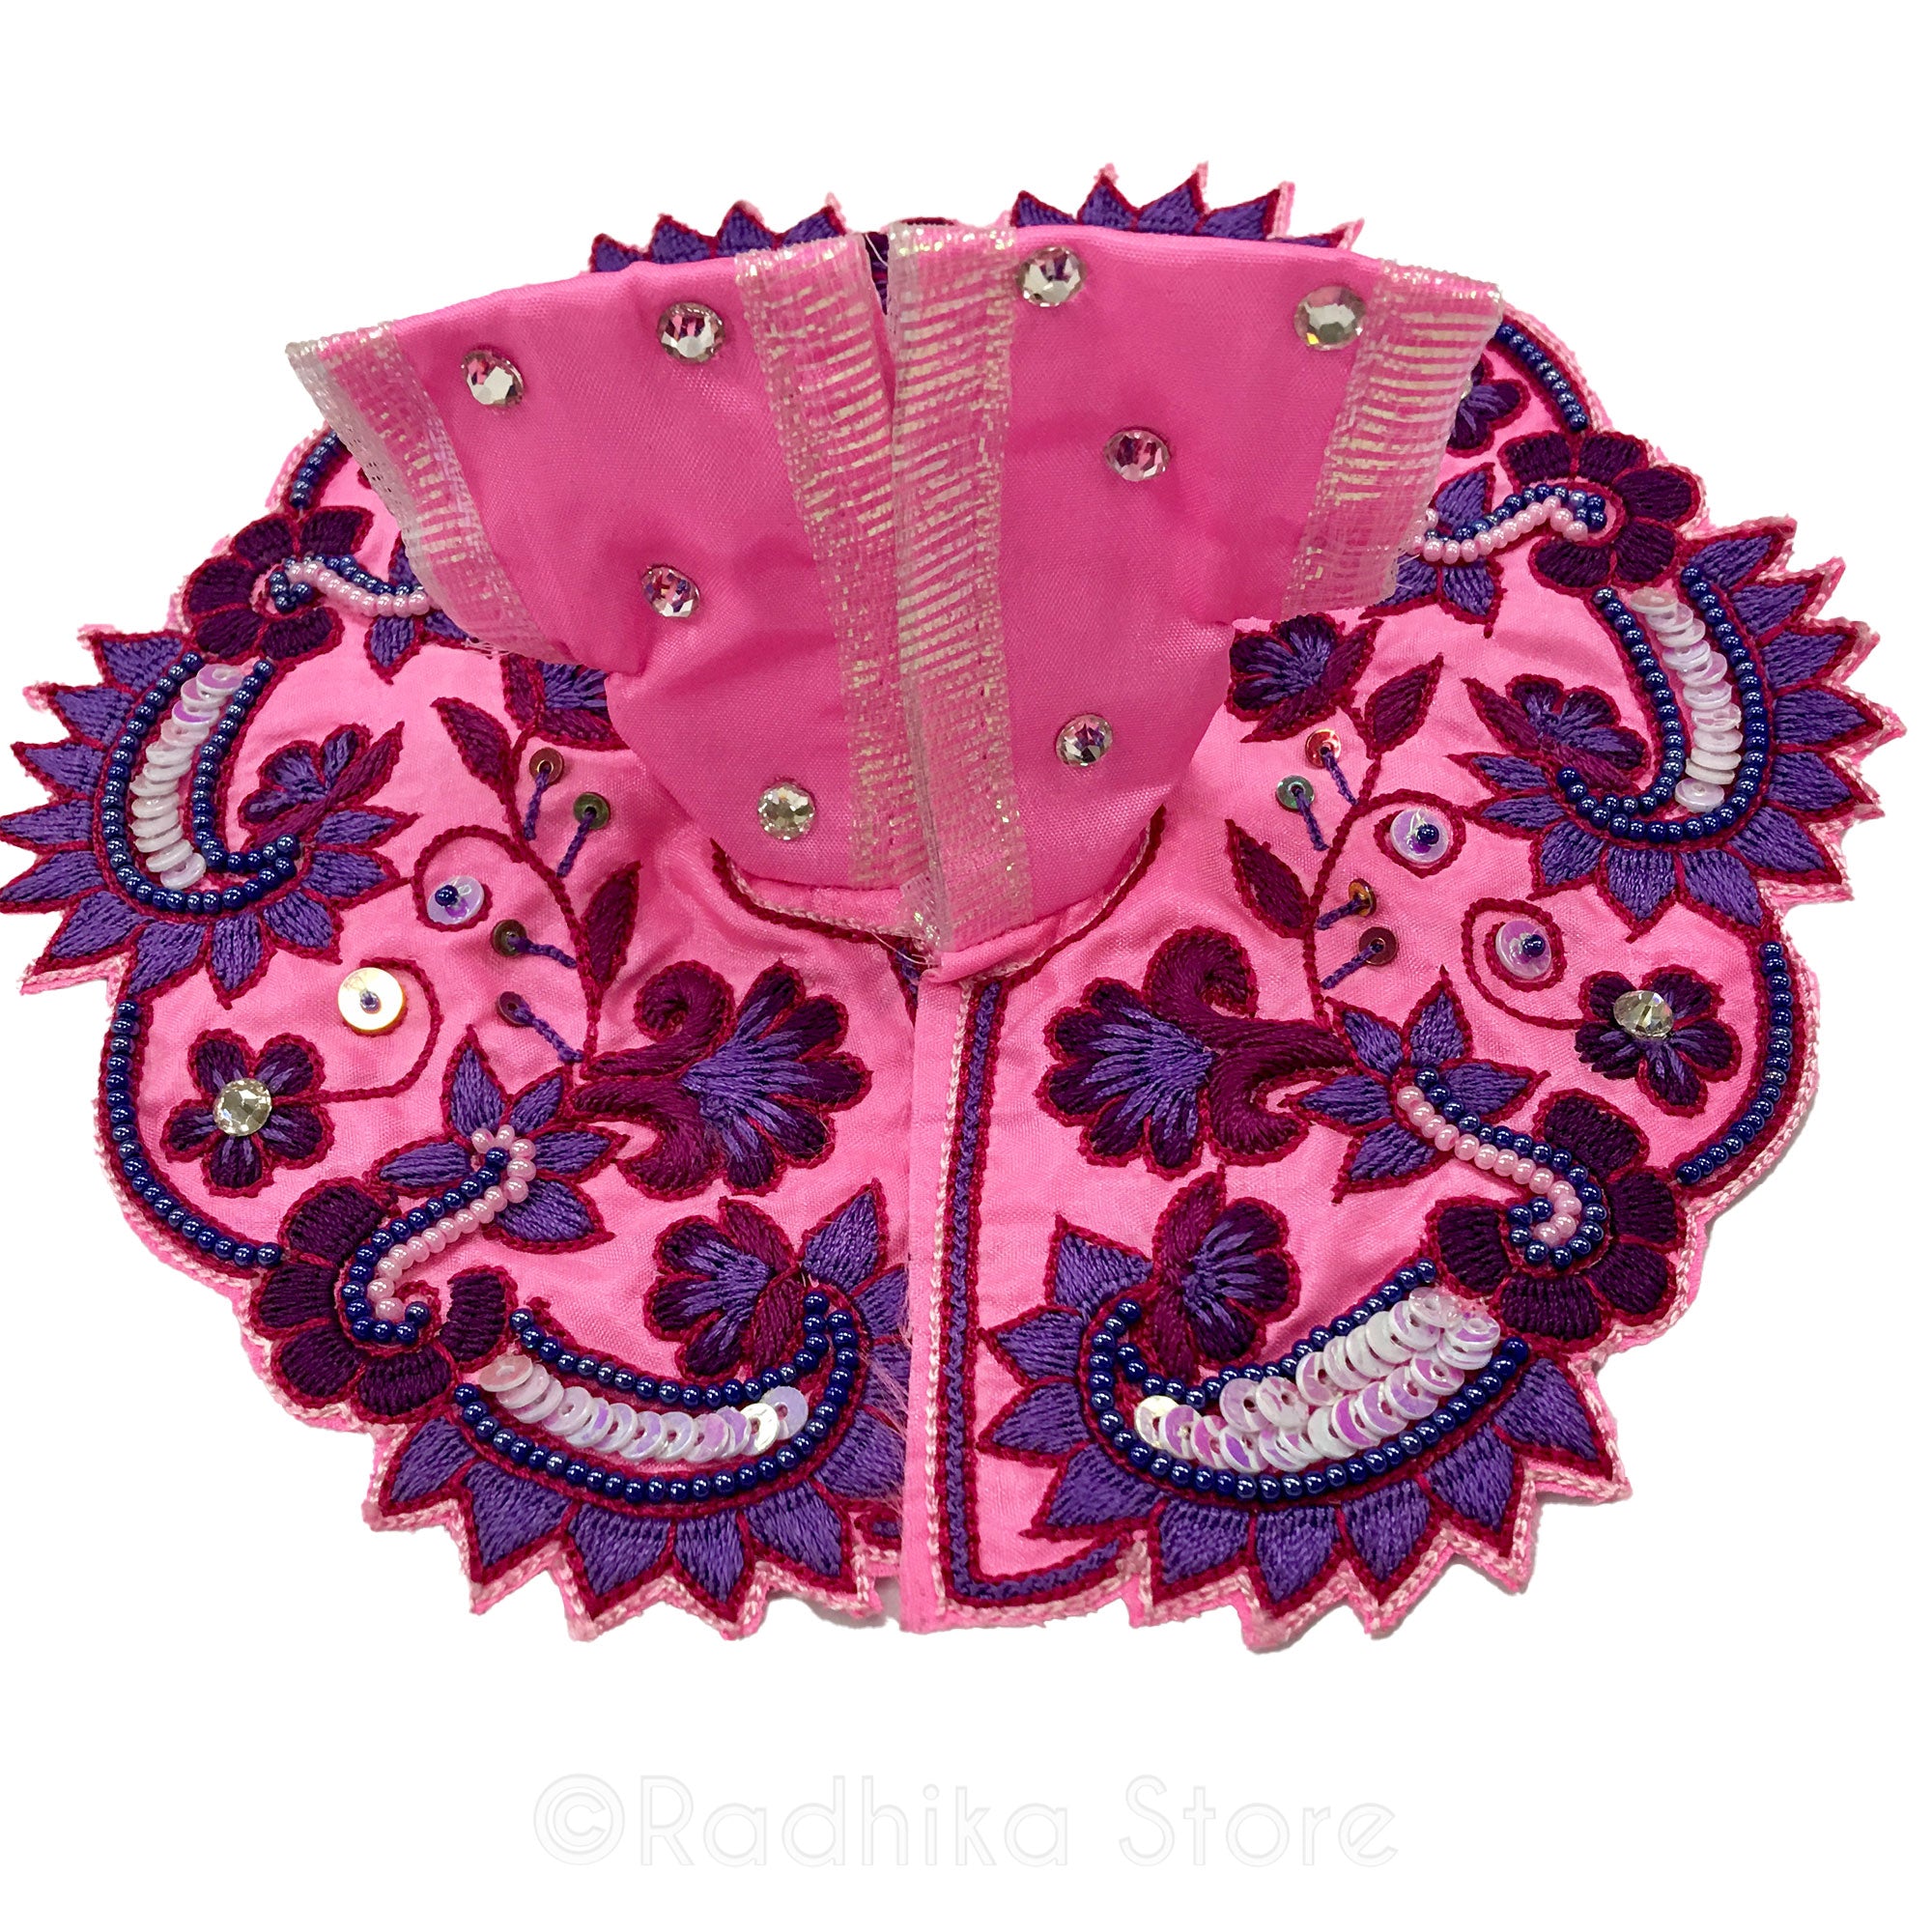 Neon Pink with Lavender -  Laddu Gopal Outfit